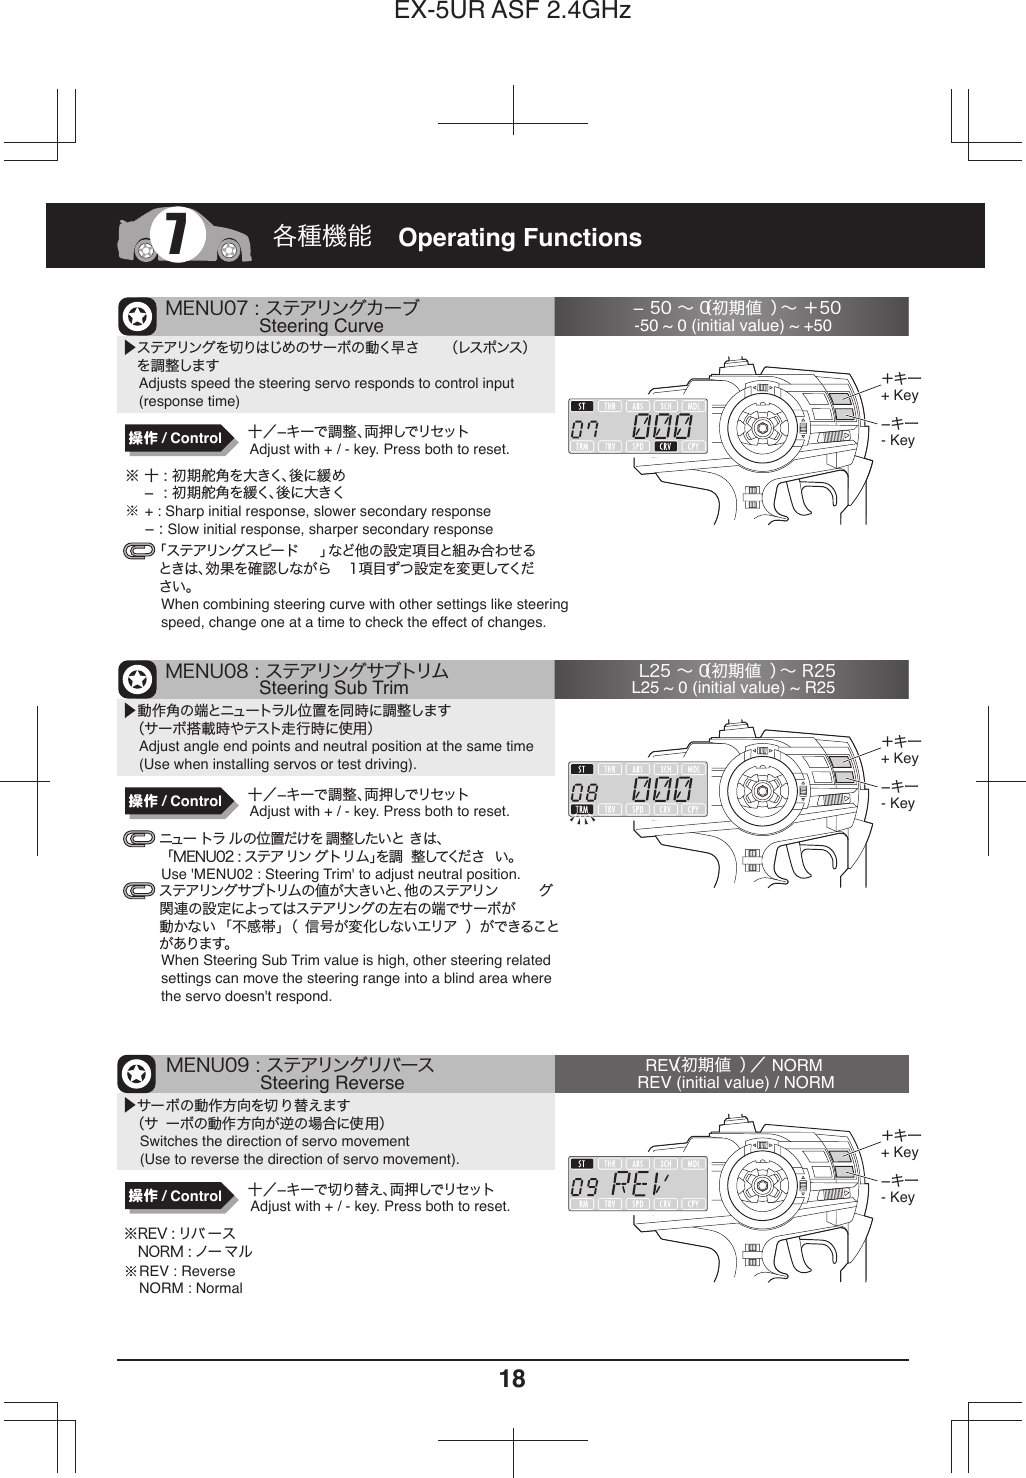 18EX-5UR ASF 2.4GHzMENU07 : ステアリングカ ーブ                  Steering Curve 50 ∼ 0（初期値 ）∼ ＋50MENU08 : ステアリング サブトリム                  Steering Sub Trim動作角の端とニュートラル位置を同時に調整します（サーボ搭載時やテスト走行時に使用）L25 ∼ 0（初期値 ）∼ R25ニュー トラ ルの位置だけを調整したいと きは、「MENU02 : ステアリン グトリム」を 調 整してくだ さ い。ステアリングサブトリムの値が 大きいと、他のステアリン グ関連の設定によってはステアリングの左右の端でサーボが動かない「不感帯」（ 信号が変化しないエリア ）ができることがあります。 ステアリングを切りはじめのサーボの動く早さ （レスポンス）を調整します「ステアリングスピー ド 」など他の設定項目と組み合わせるときは、効果を確認しながら 1項目ずつ設定を変更してください。※ 十 : 初期舵角を大きく、後に緩め    : 初期舵角を緩く、後に大きく 7各種機能サーボの動作方向を切り替えます（サ ーボの動作方向が逆の場合に使用）※REV : リバ ース NORM : ノーマルMENU09 : ステアリングリバース                  Steering Reverse REV（初期値 ）／ NORMREV : ReverseNORM : Normal十／キーで調整、両押しでリセット/ Control十／キーで調整、両押しでリセット/ Control十／キーで切り替え、両押しでリセット/ Control-50 ~ 0 (initial value) ~ +50Adjusts speed the steering servo responds to control input(response time)When combining steering curve with other settings like steeringspeed, change one at a time to check the effect of changes.+ : Sharp initial response, slower secondary response : Slow initial response, sharper secondary response Operating FunctionsAdjust with + / - key. Press both to reset.Adjust angle end points and neutral position at the same time(Use when installing servos or test driving).L25 ~ 0 (initial value) ~ R25Use &apos;MENU02 : Steering Trim&apos; to adjust neutral position.When Steering Sub Trim value is high, other steering related settings can move the steering range into a blind area wherethe servo doesn&apos;t respond.Adjust with + / - key. Press both to reset.Switches the direction of servo movement(Use to reverse the direction of servo movement).REV (initial value) / NORMAdjust with + / - key. Press both to reset.  ＋キ一+ Keyキ一- Key＋キ一+ Keyキ一- Key＋キ一+ Keyキ一- Key